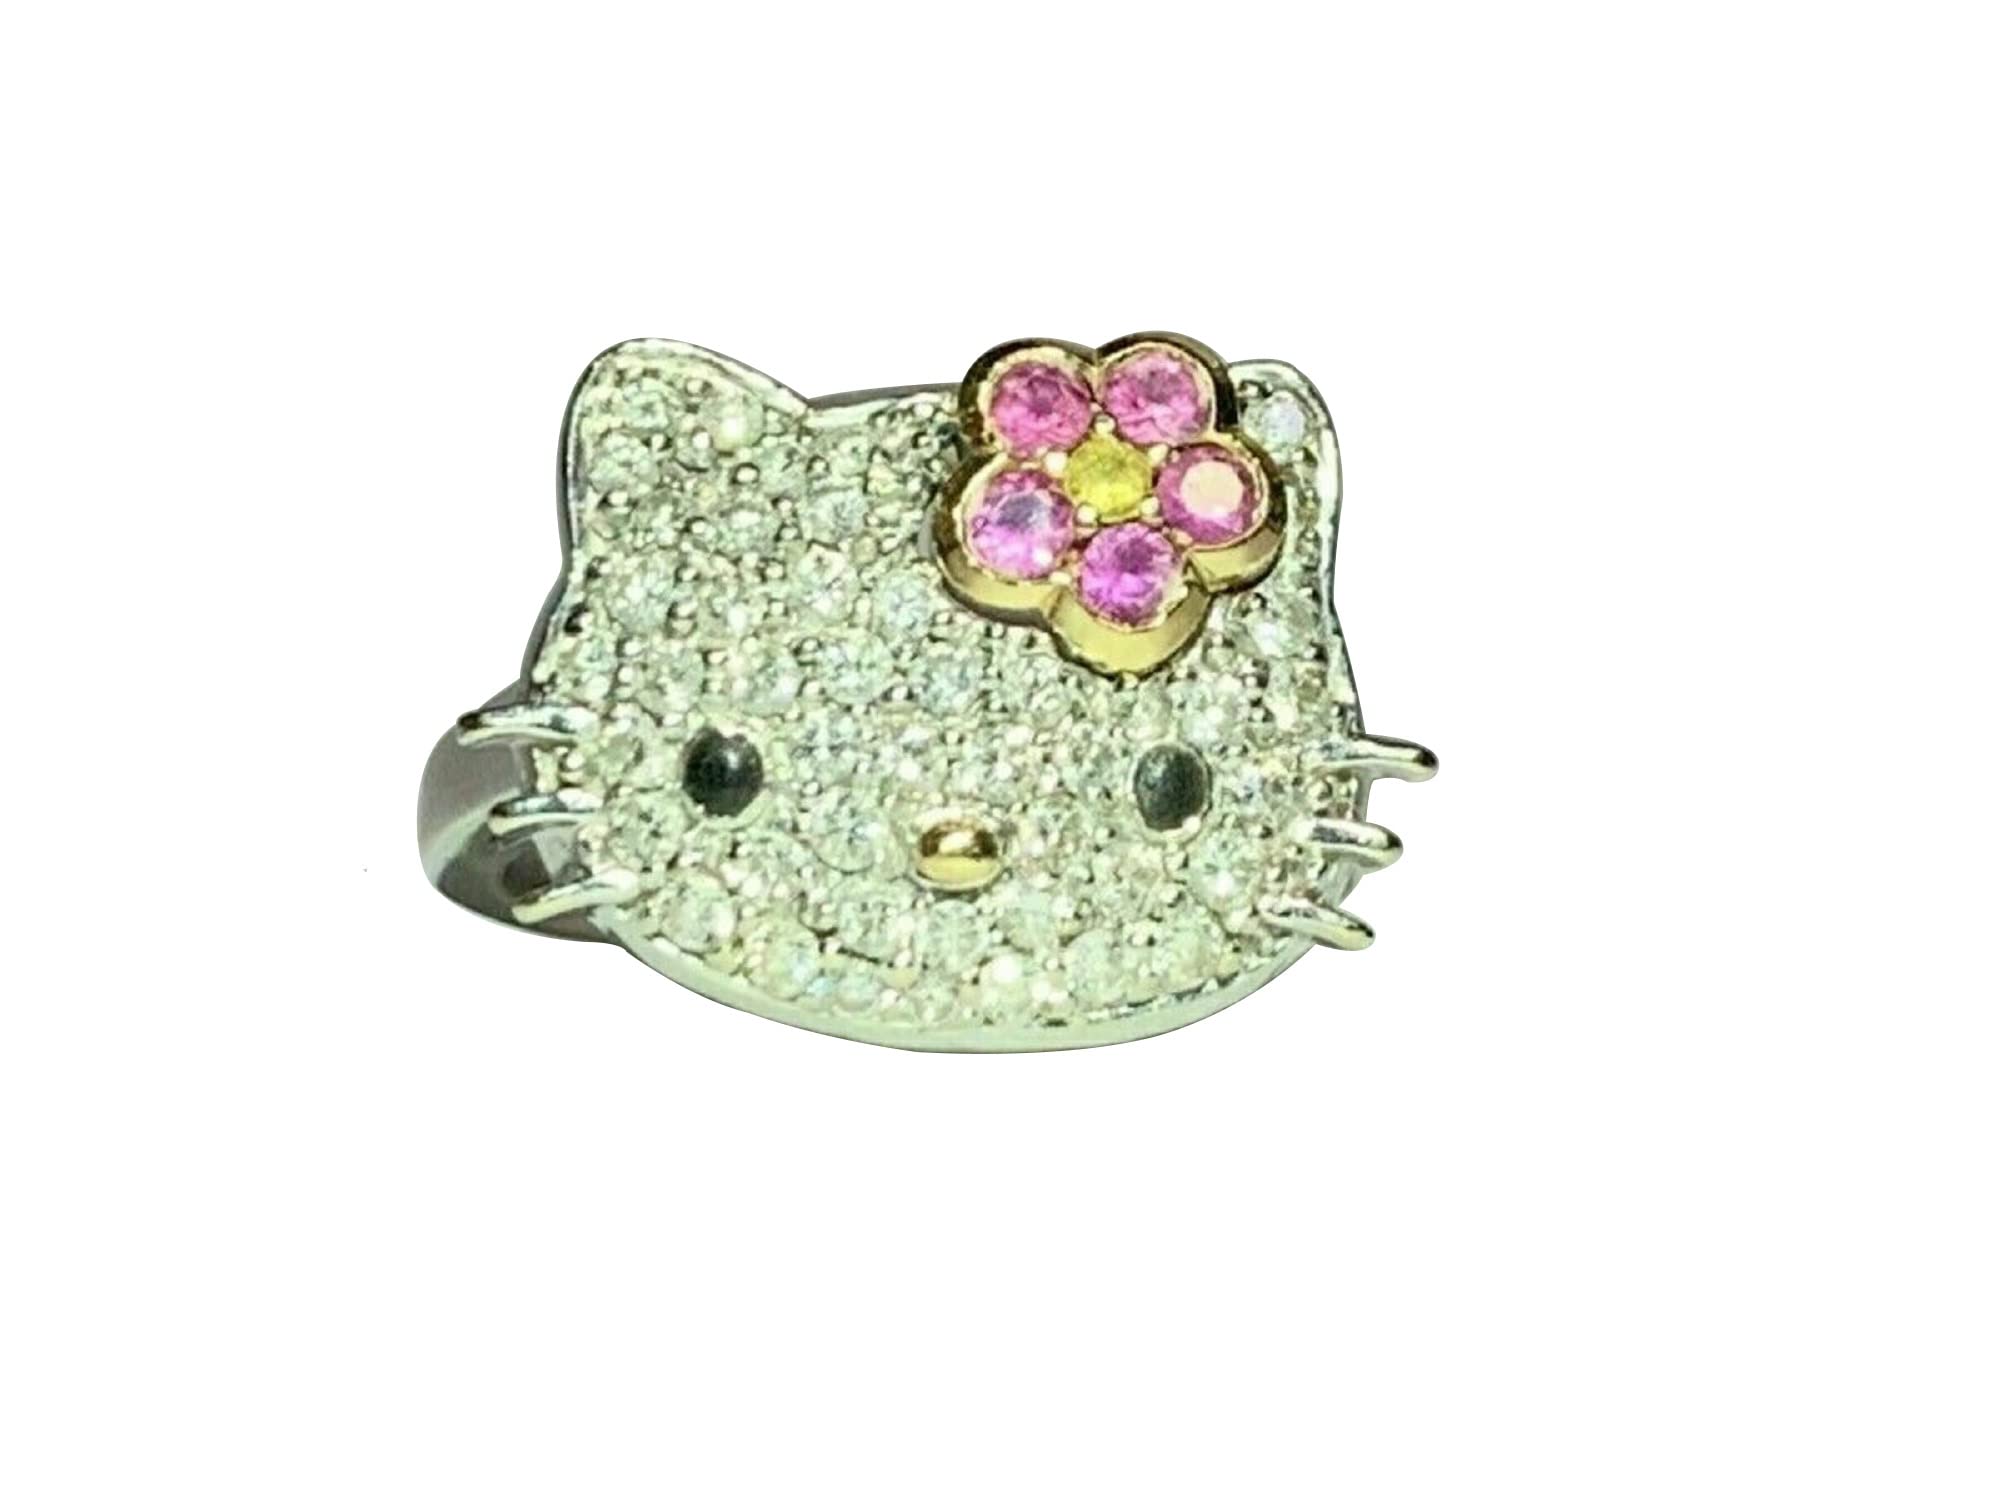 Dazzle Rainbow Jewelry Hello Kitty Diamond Ring /2CT Round Cut Fully Iced Diamond Solid 925 Sterling Silver/Art Deco Ring/Women's Gift Cute Kitty Ring